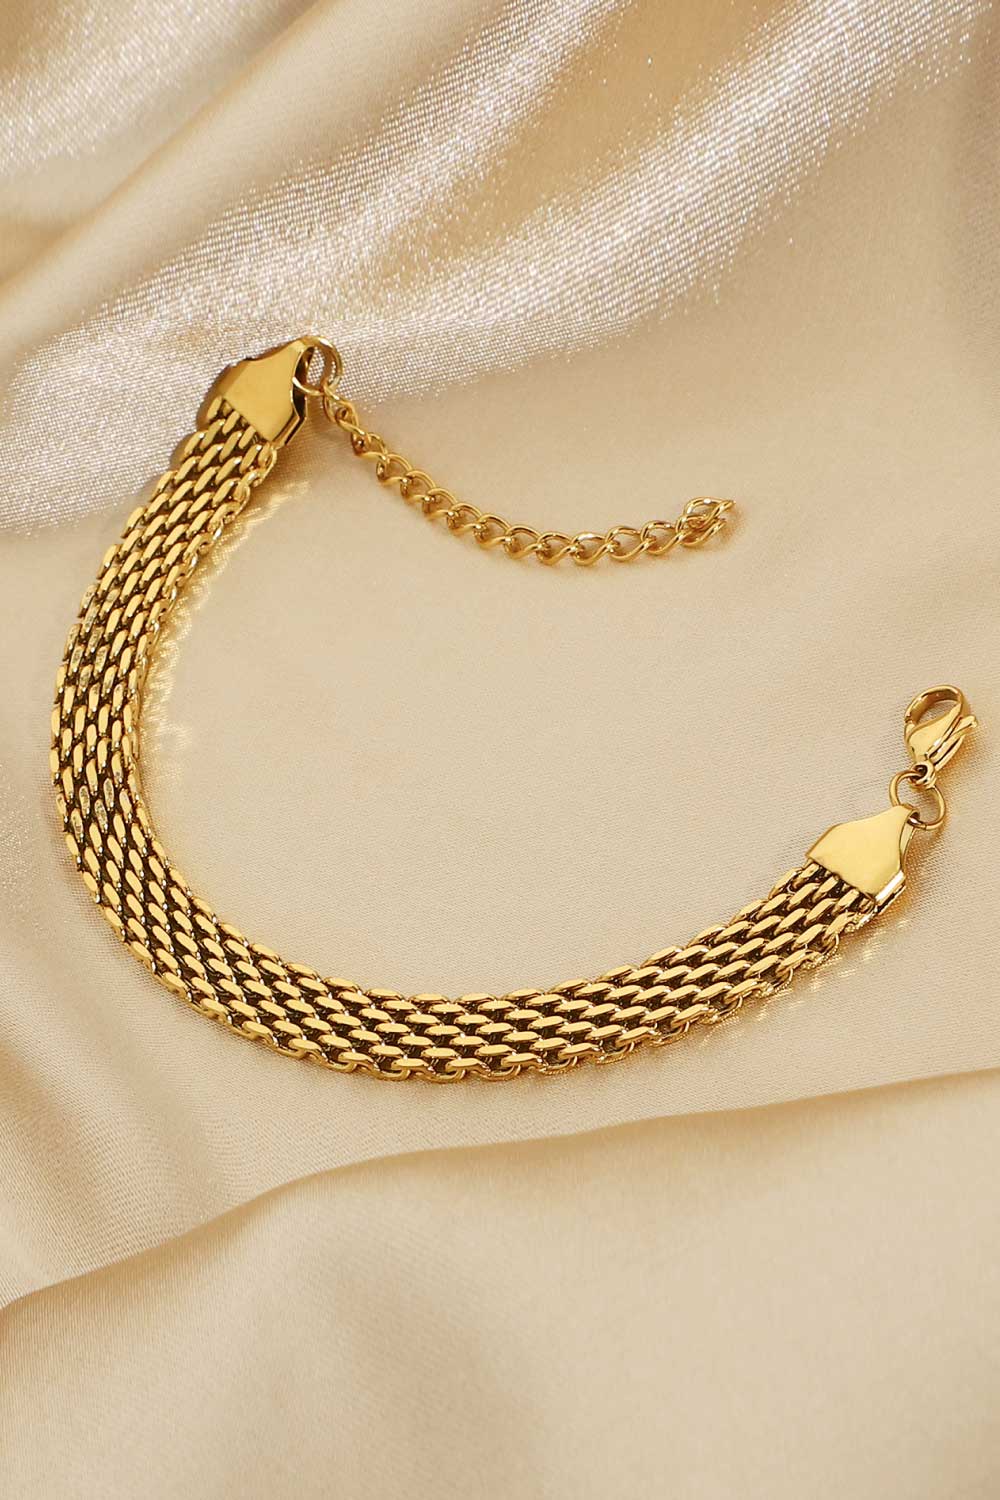 18K Gold-Plated Wide Chain Bracelet - Uylee's Boutique